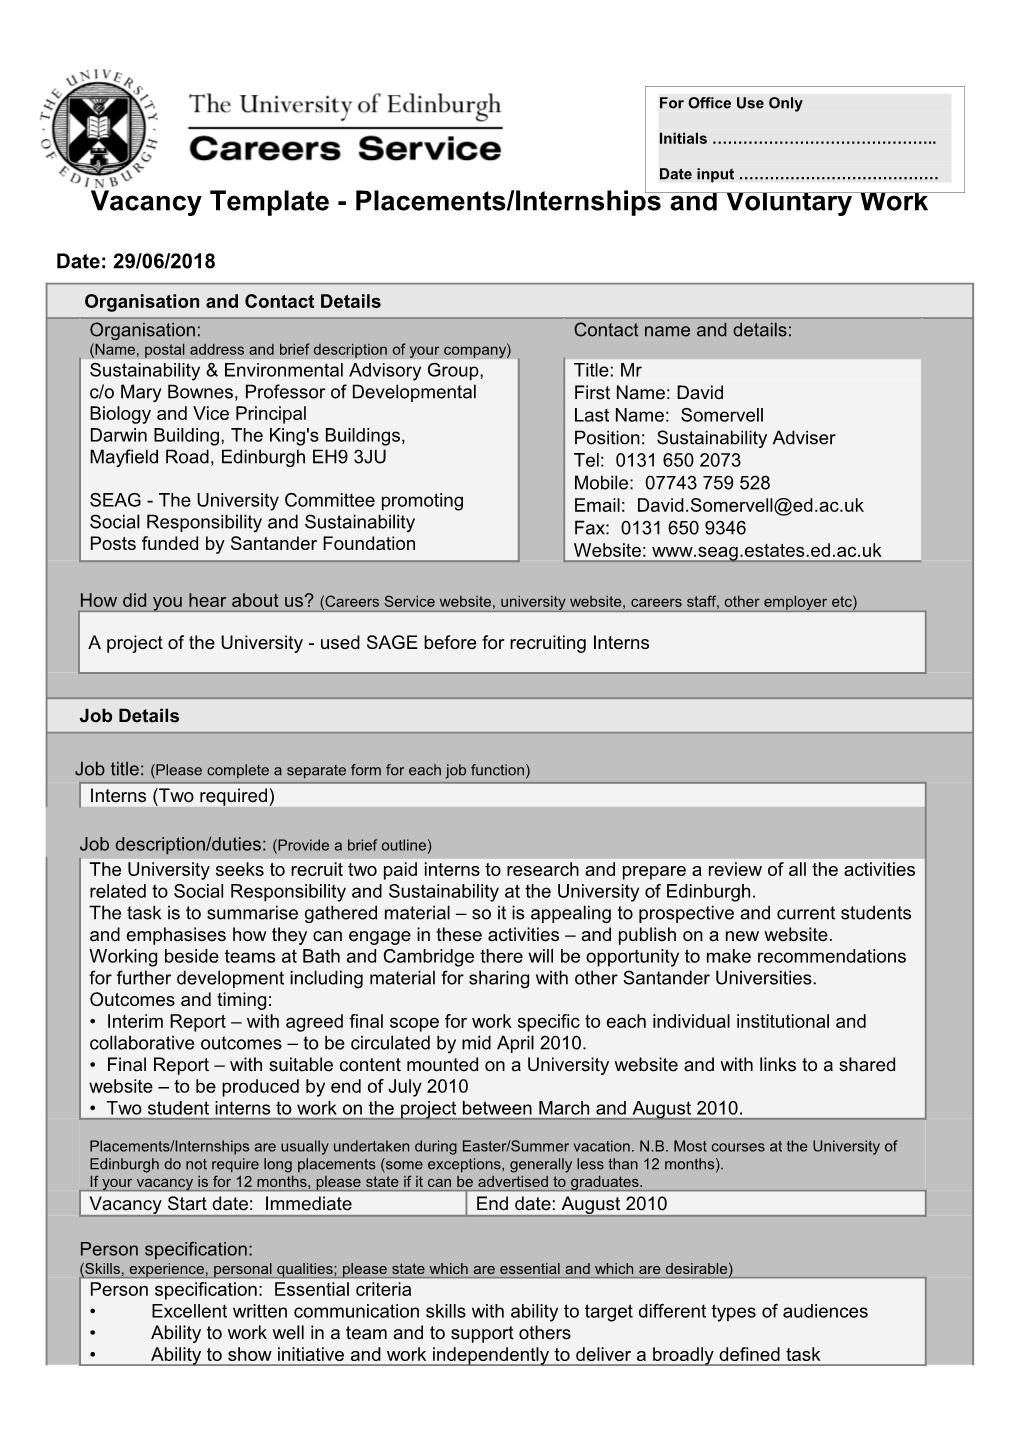 Vacancy Template - Part-Time, One-Off and Vacation Work